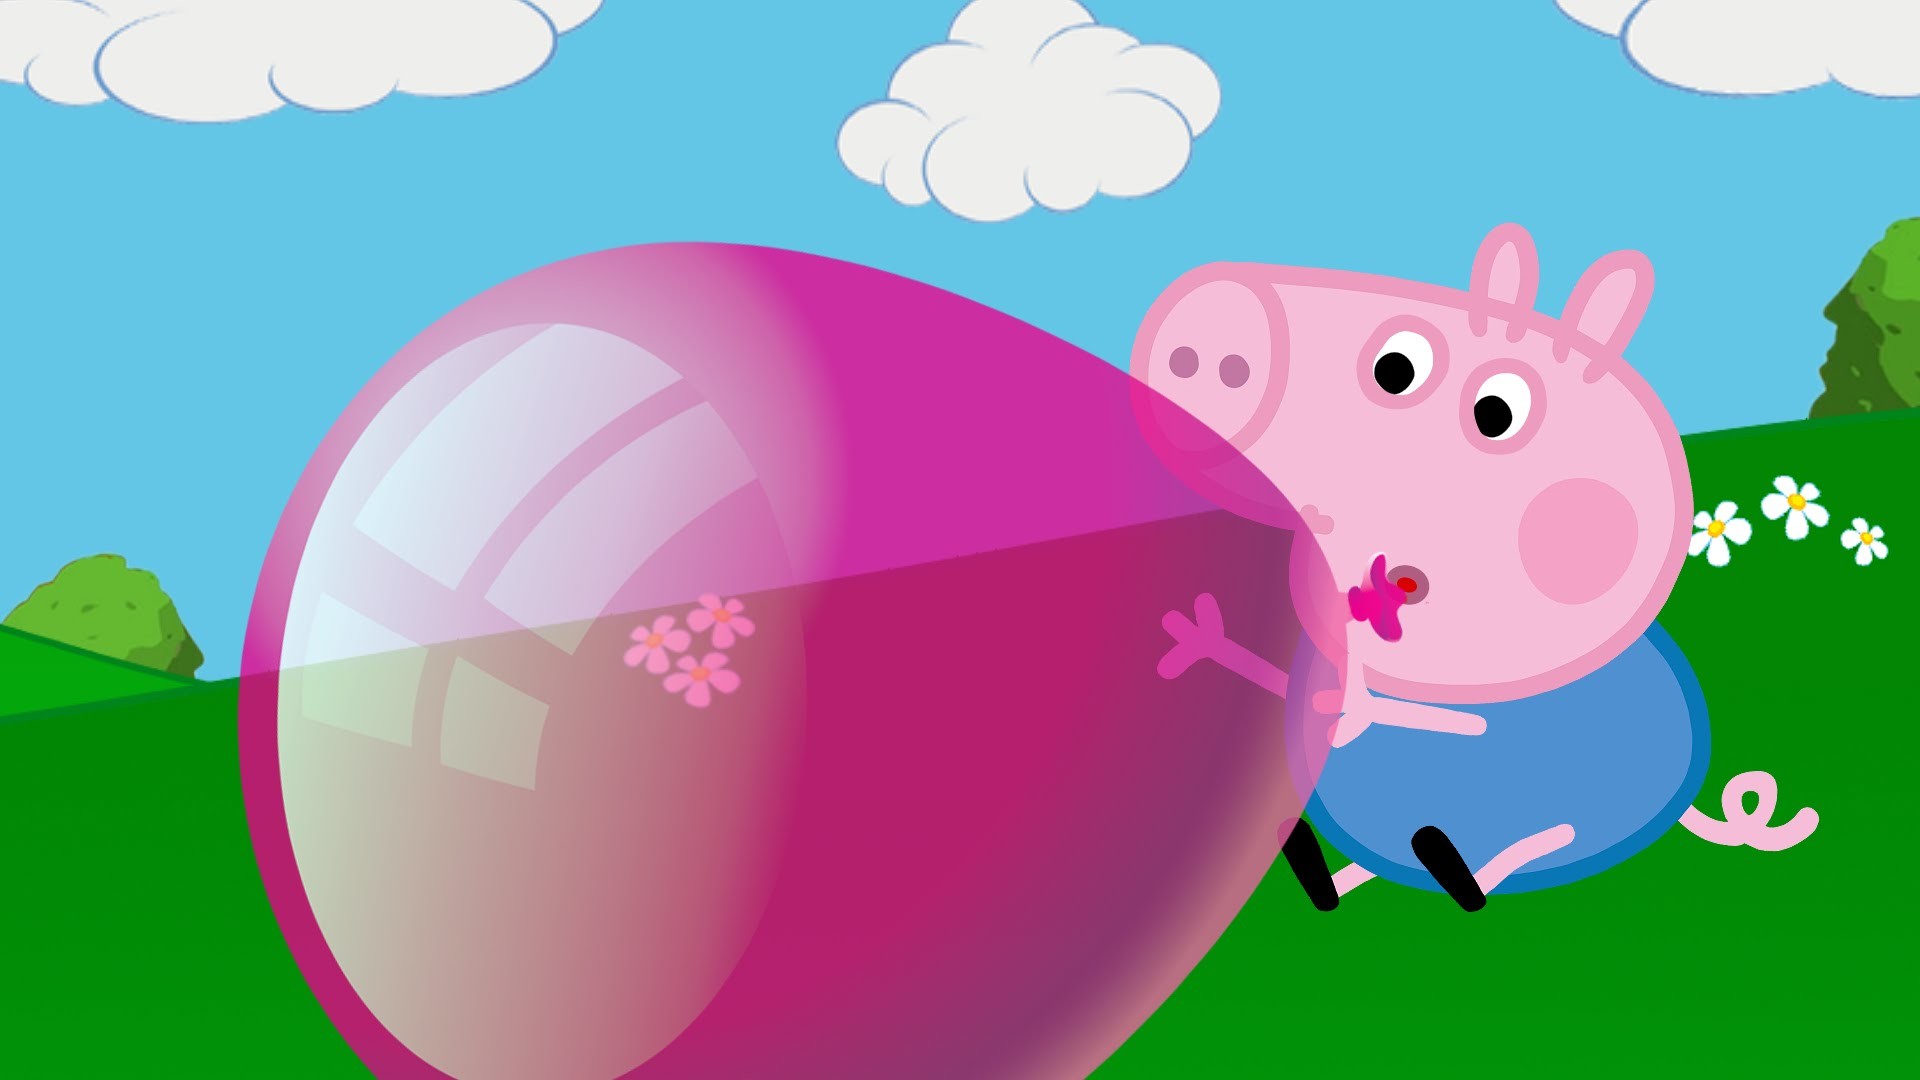 George Is Crying George Lost His Balloon - George Wallpaper Pepa Pig - HD Wallpaper 